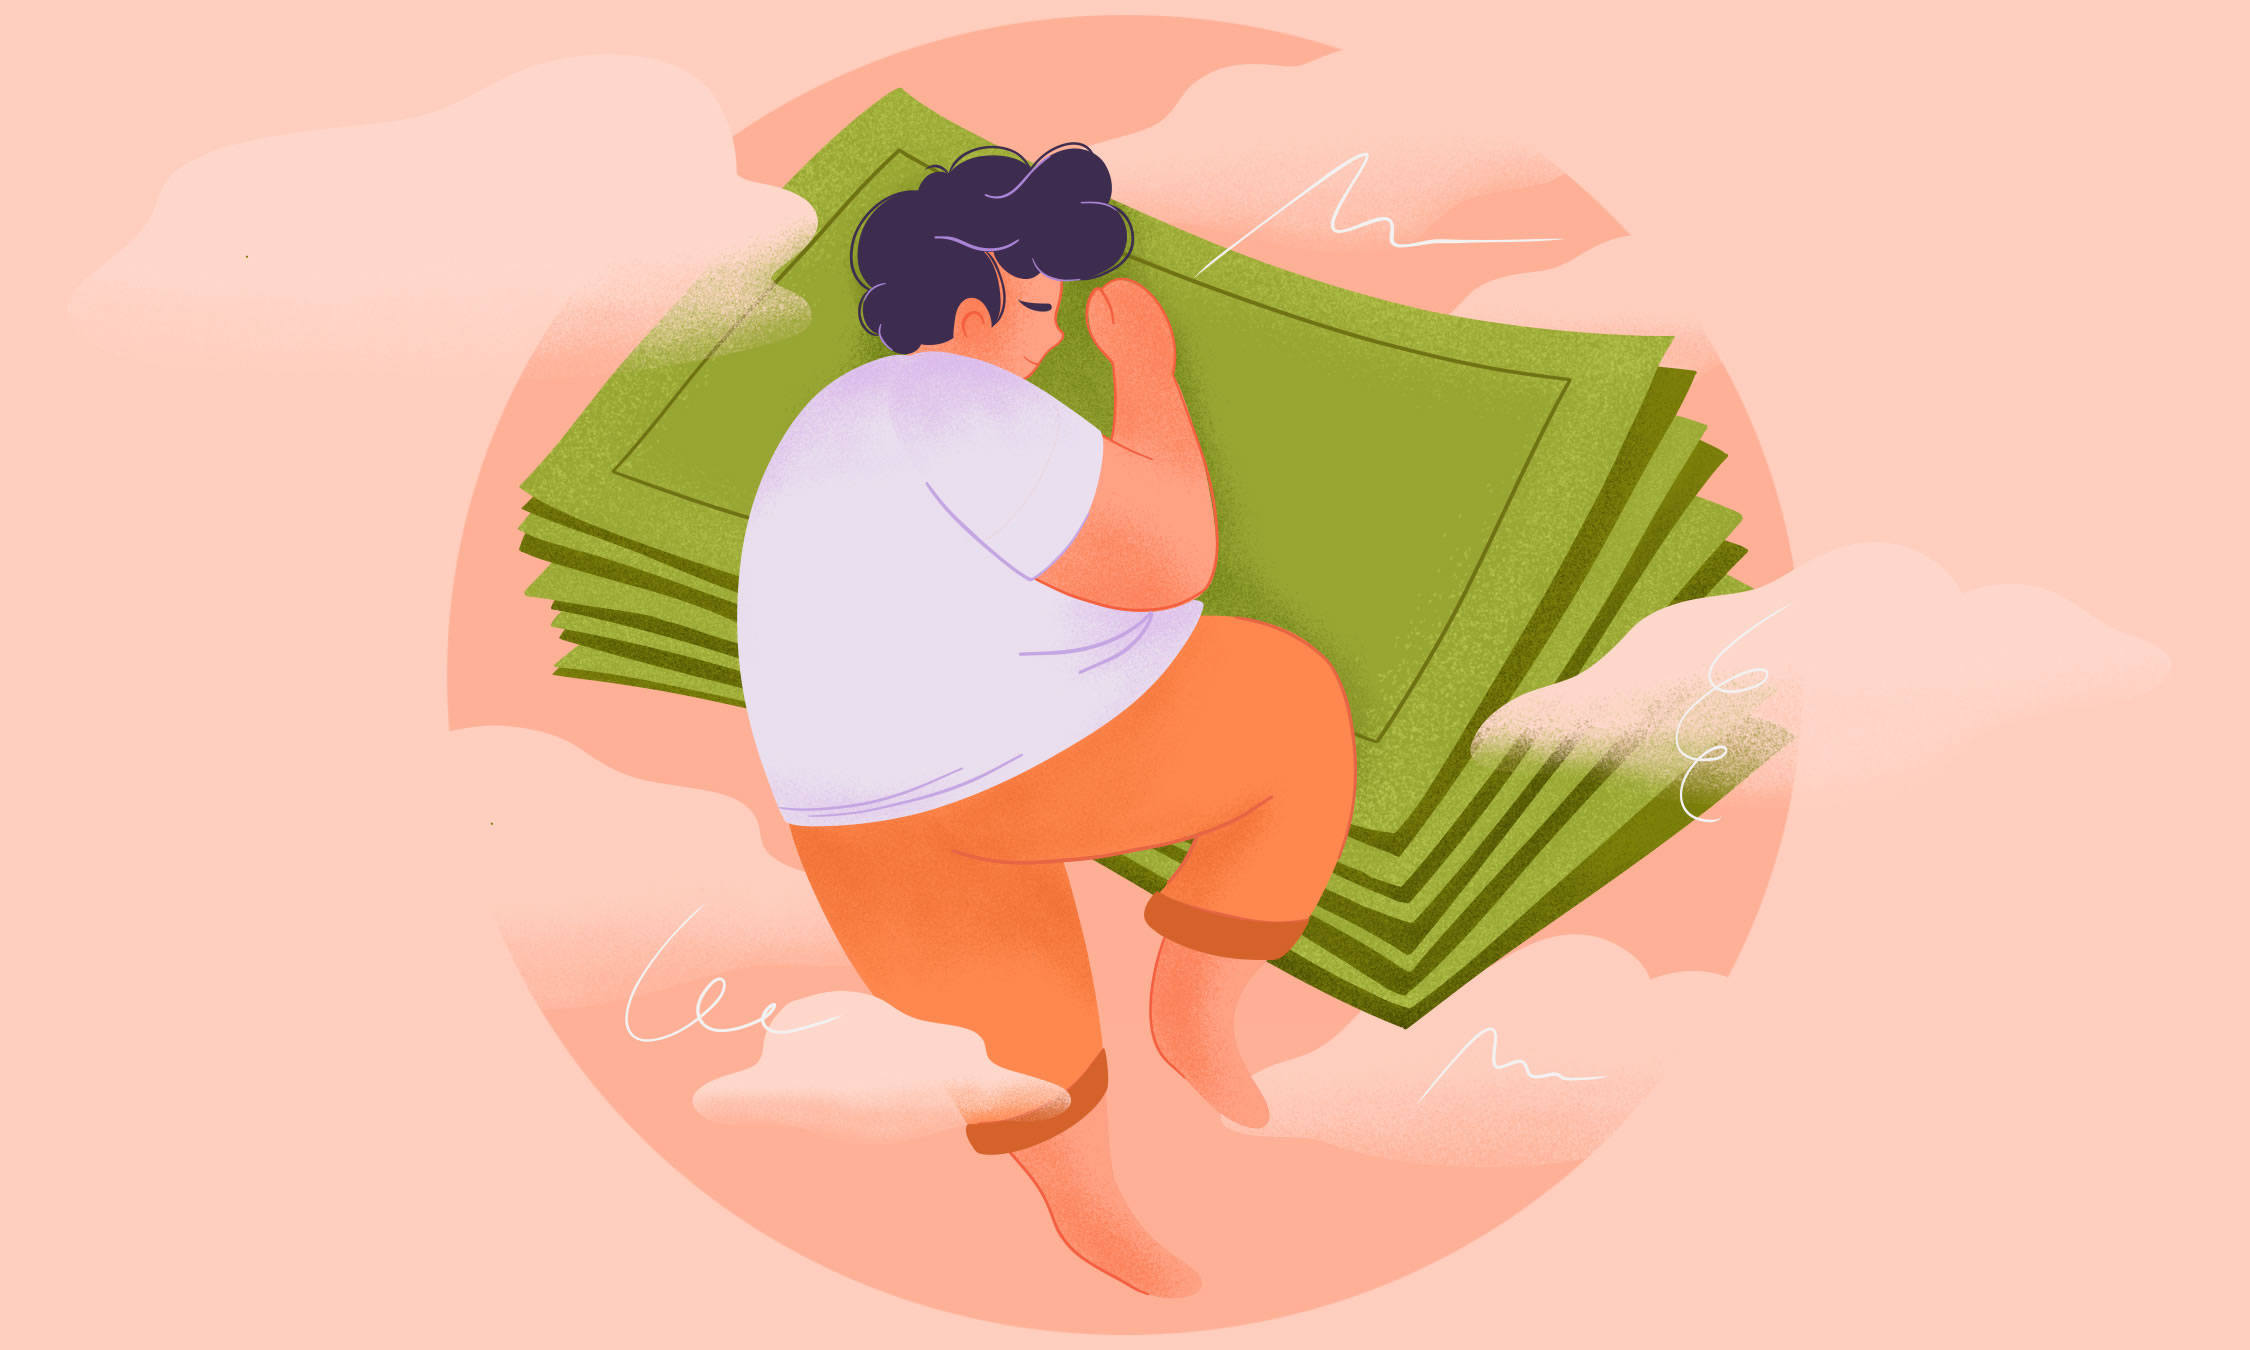 Pink background with clouds over pink moon and a depiction of a black-haired person with orange pants and a white shirt sleeping on a pillow of cash. 